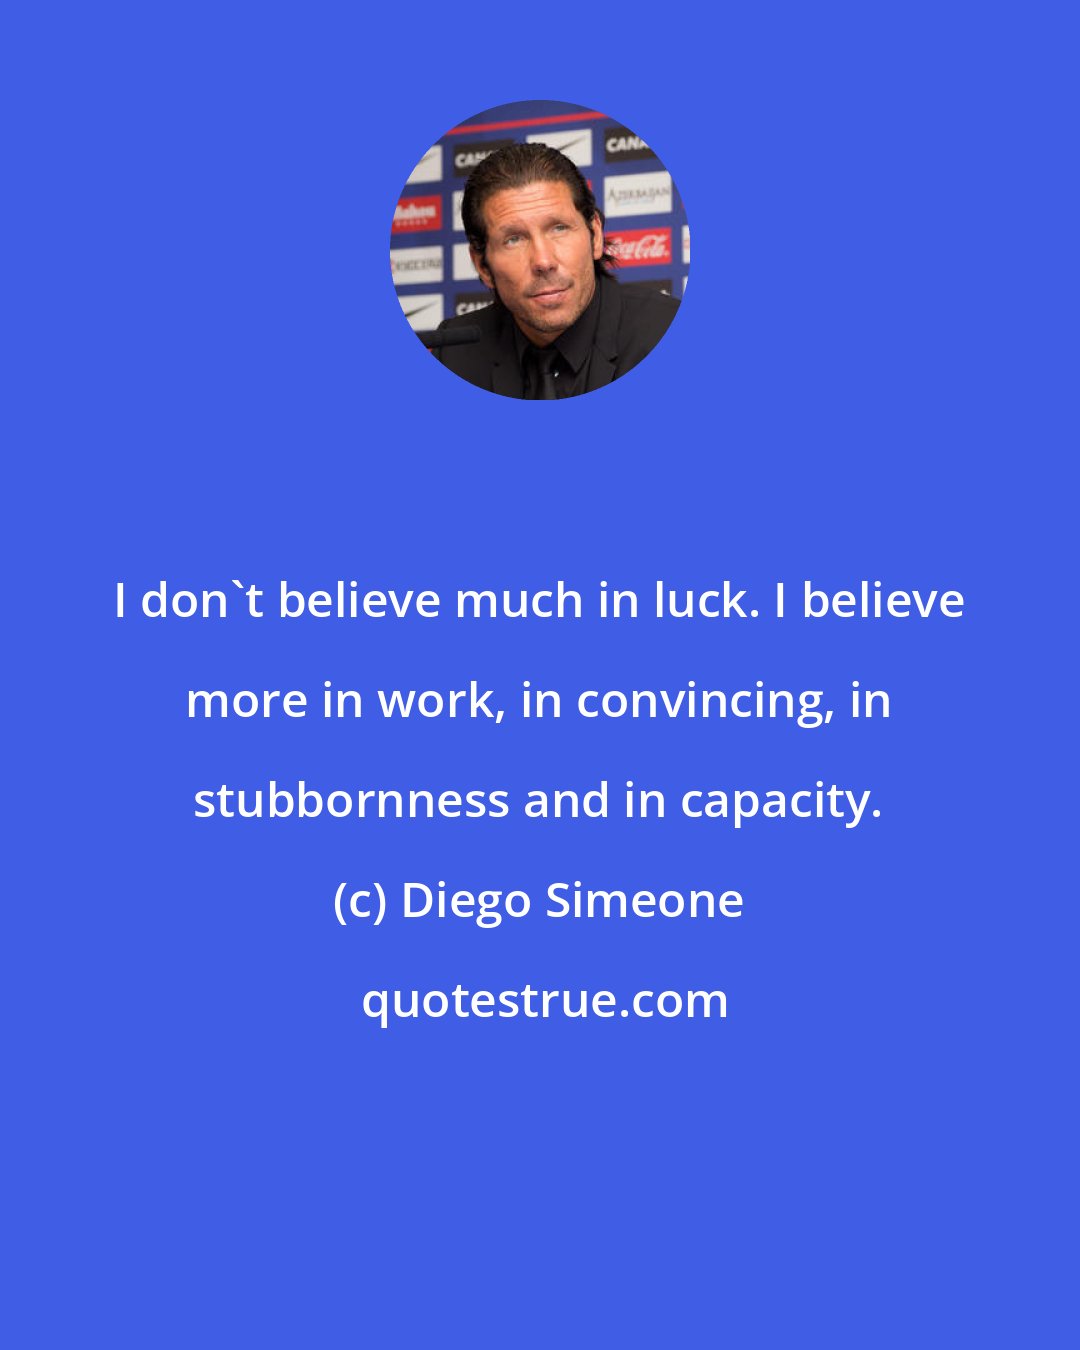 Diego Simeone: I don't believe much in luck. I believe more in work, in convincing, in stubbornness and in capacity.